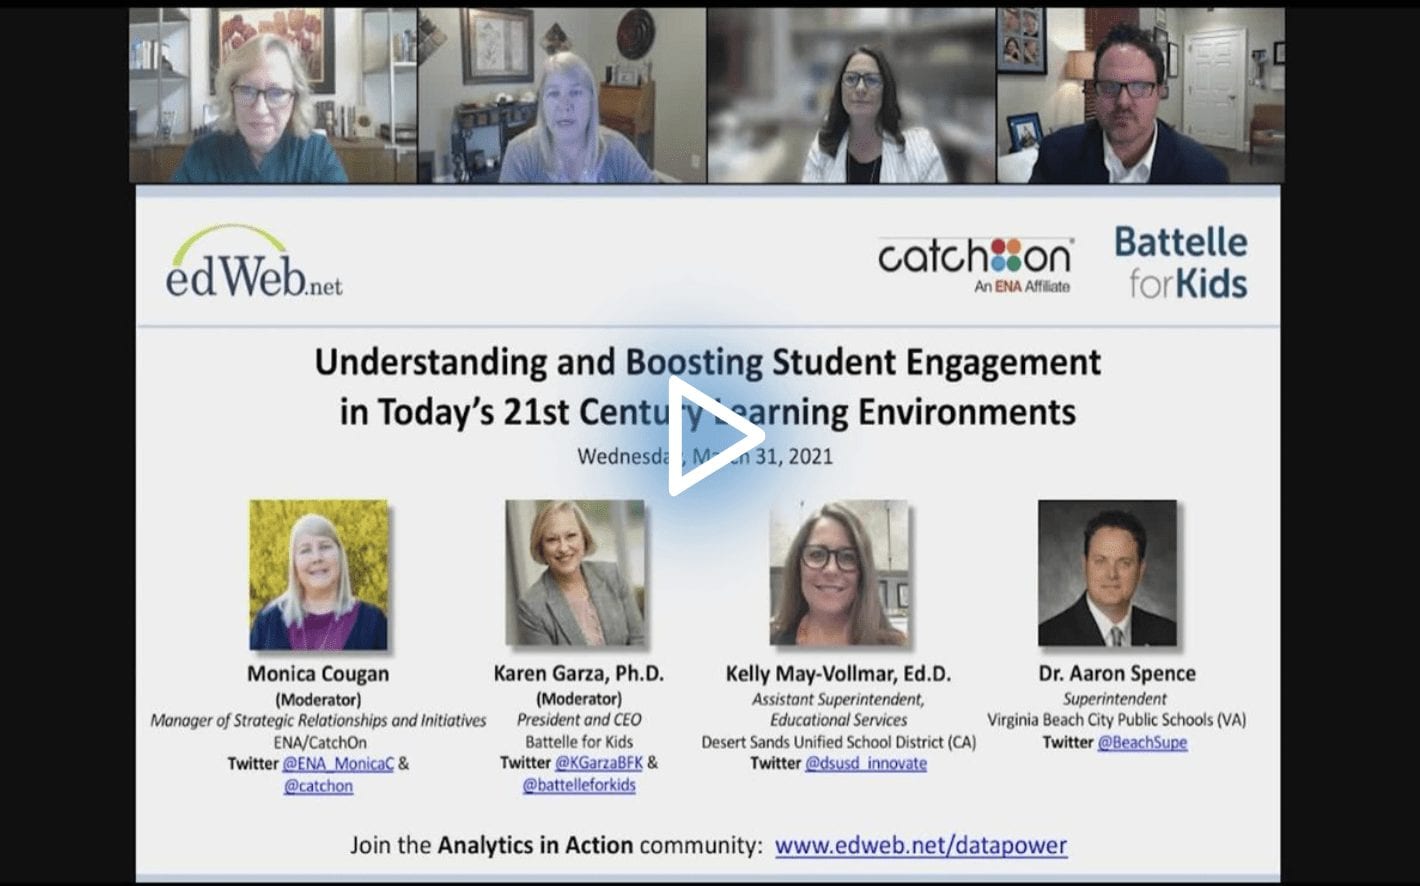 Understanding and Boosting Student Engagement in Today’s 21st Century Learning Environments edLeader Panel recording link